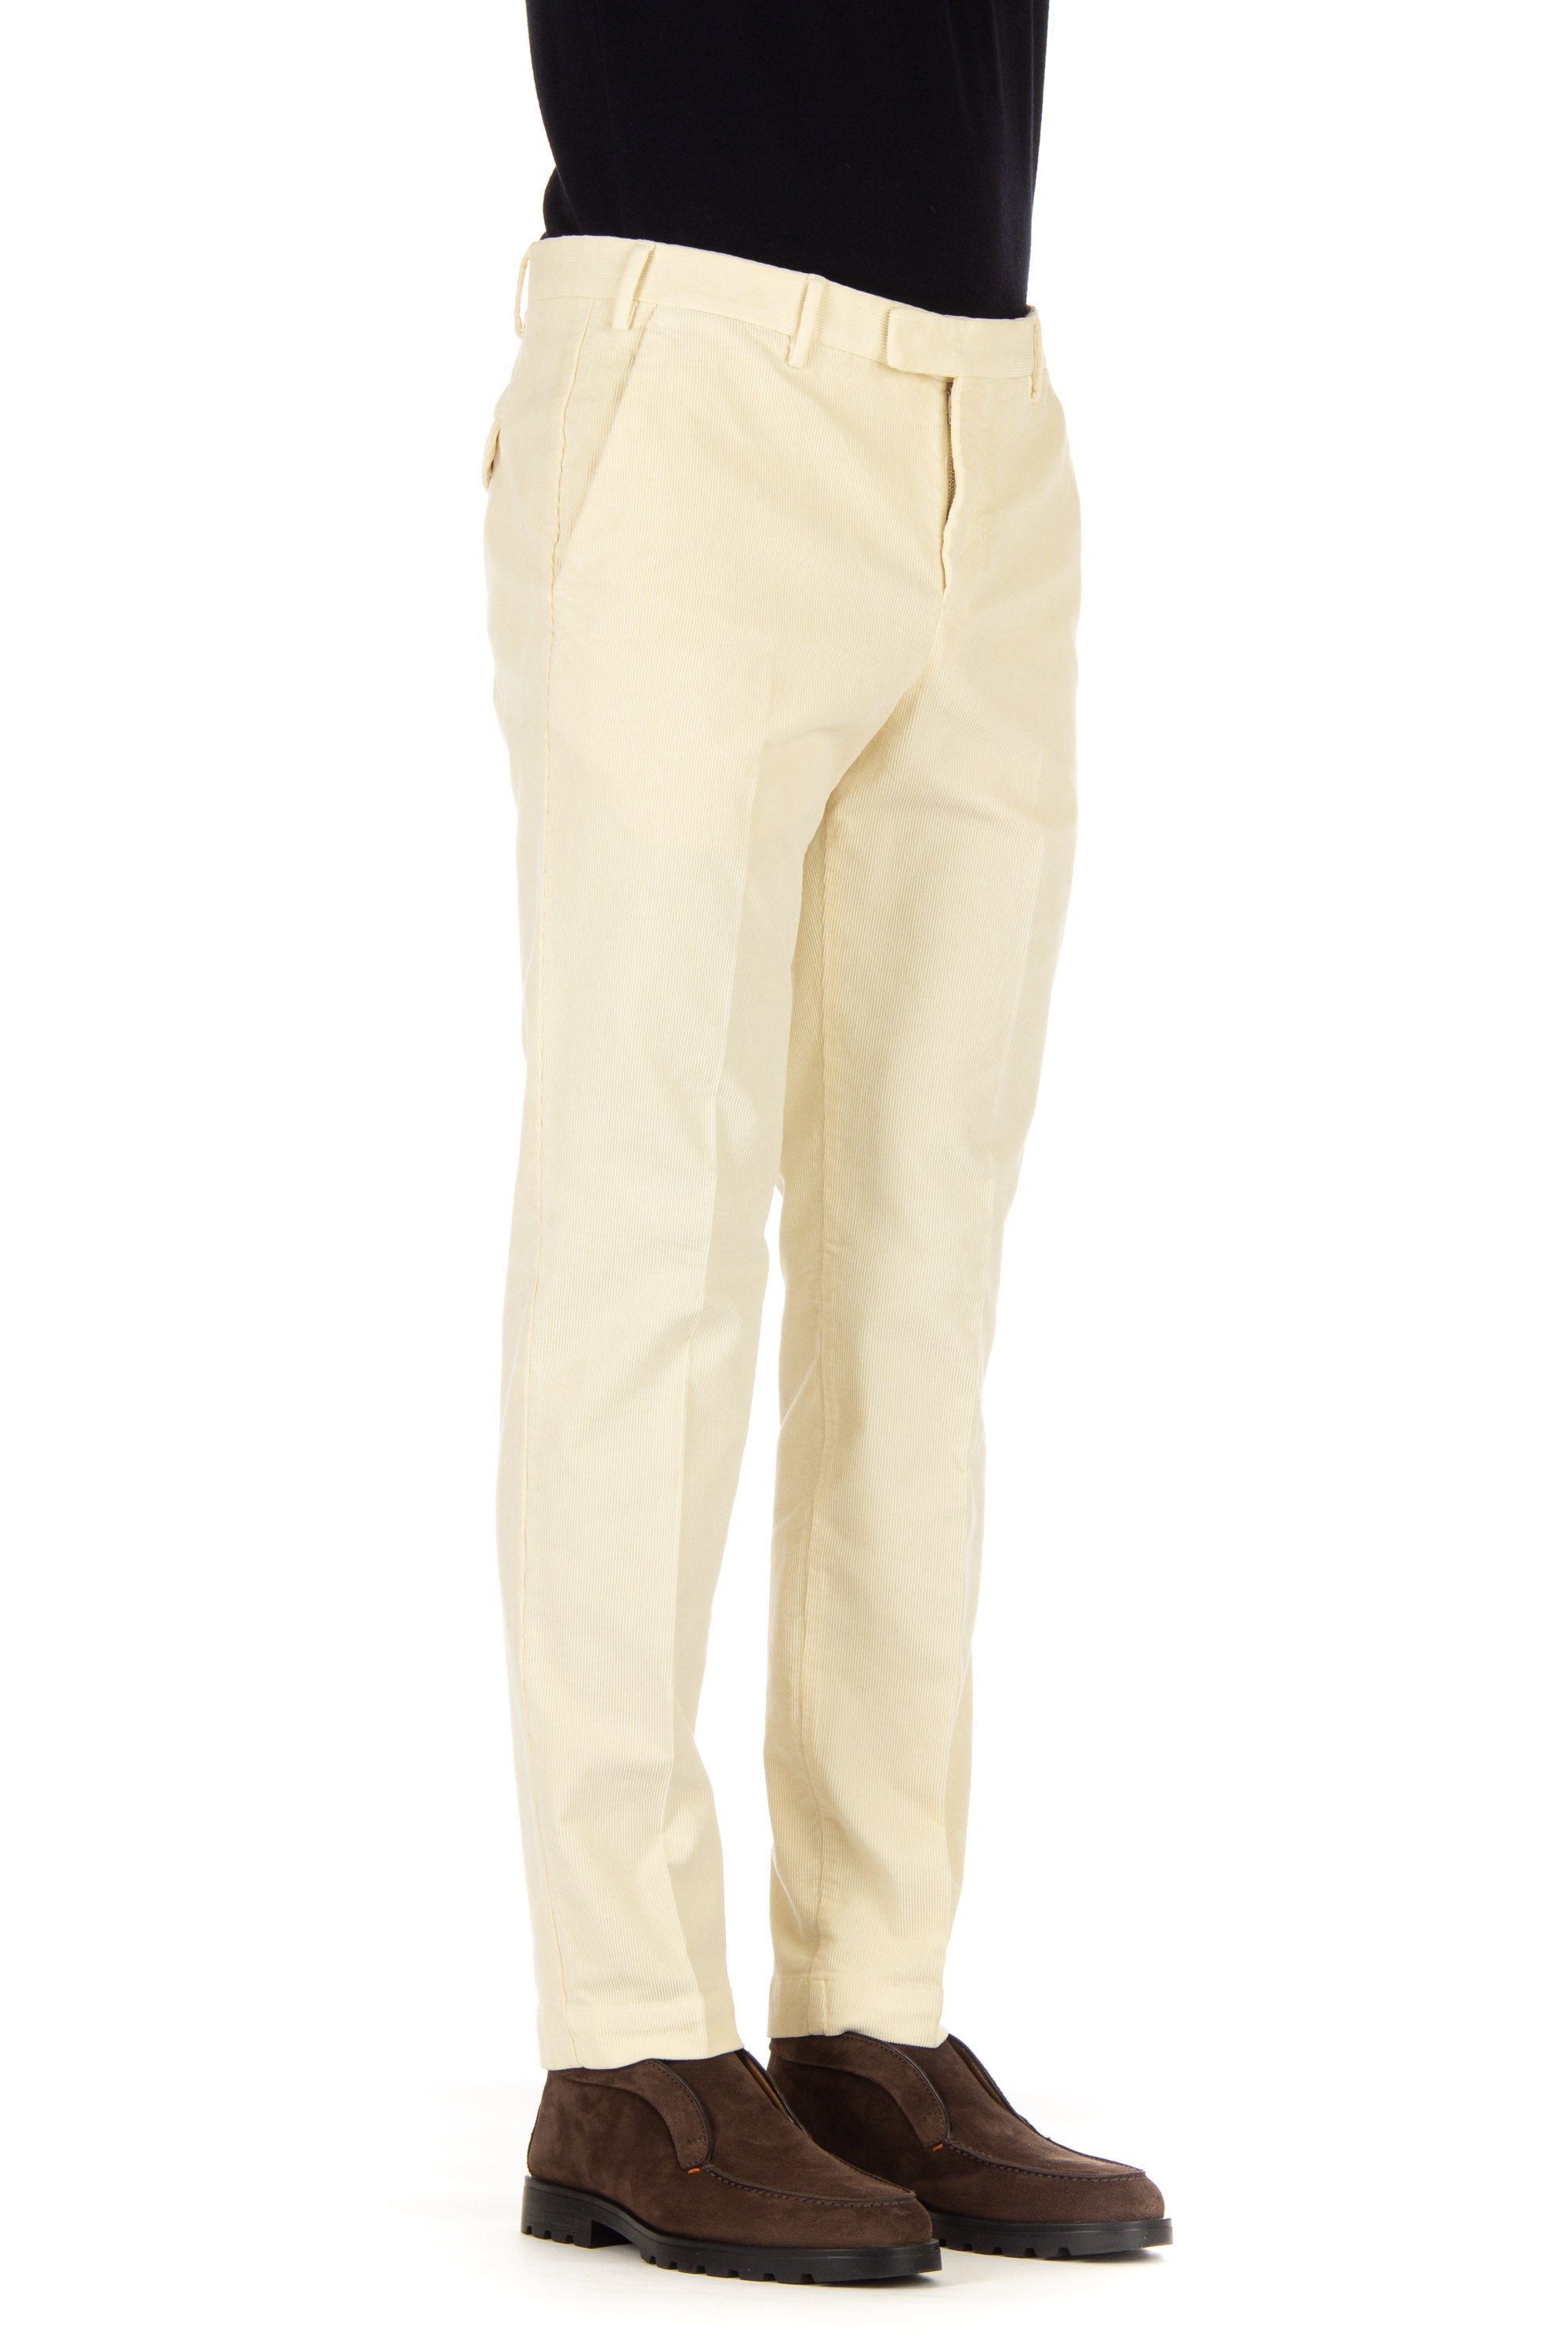 Pantalone in velluto 800 righe master fit